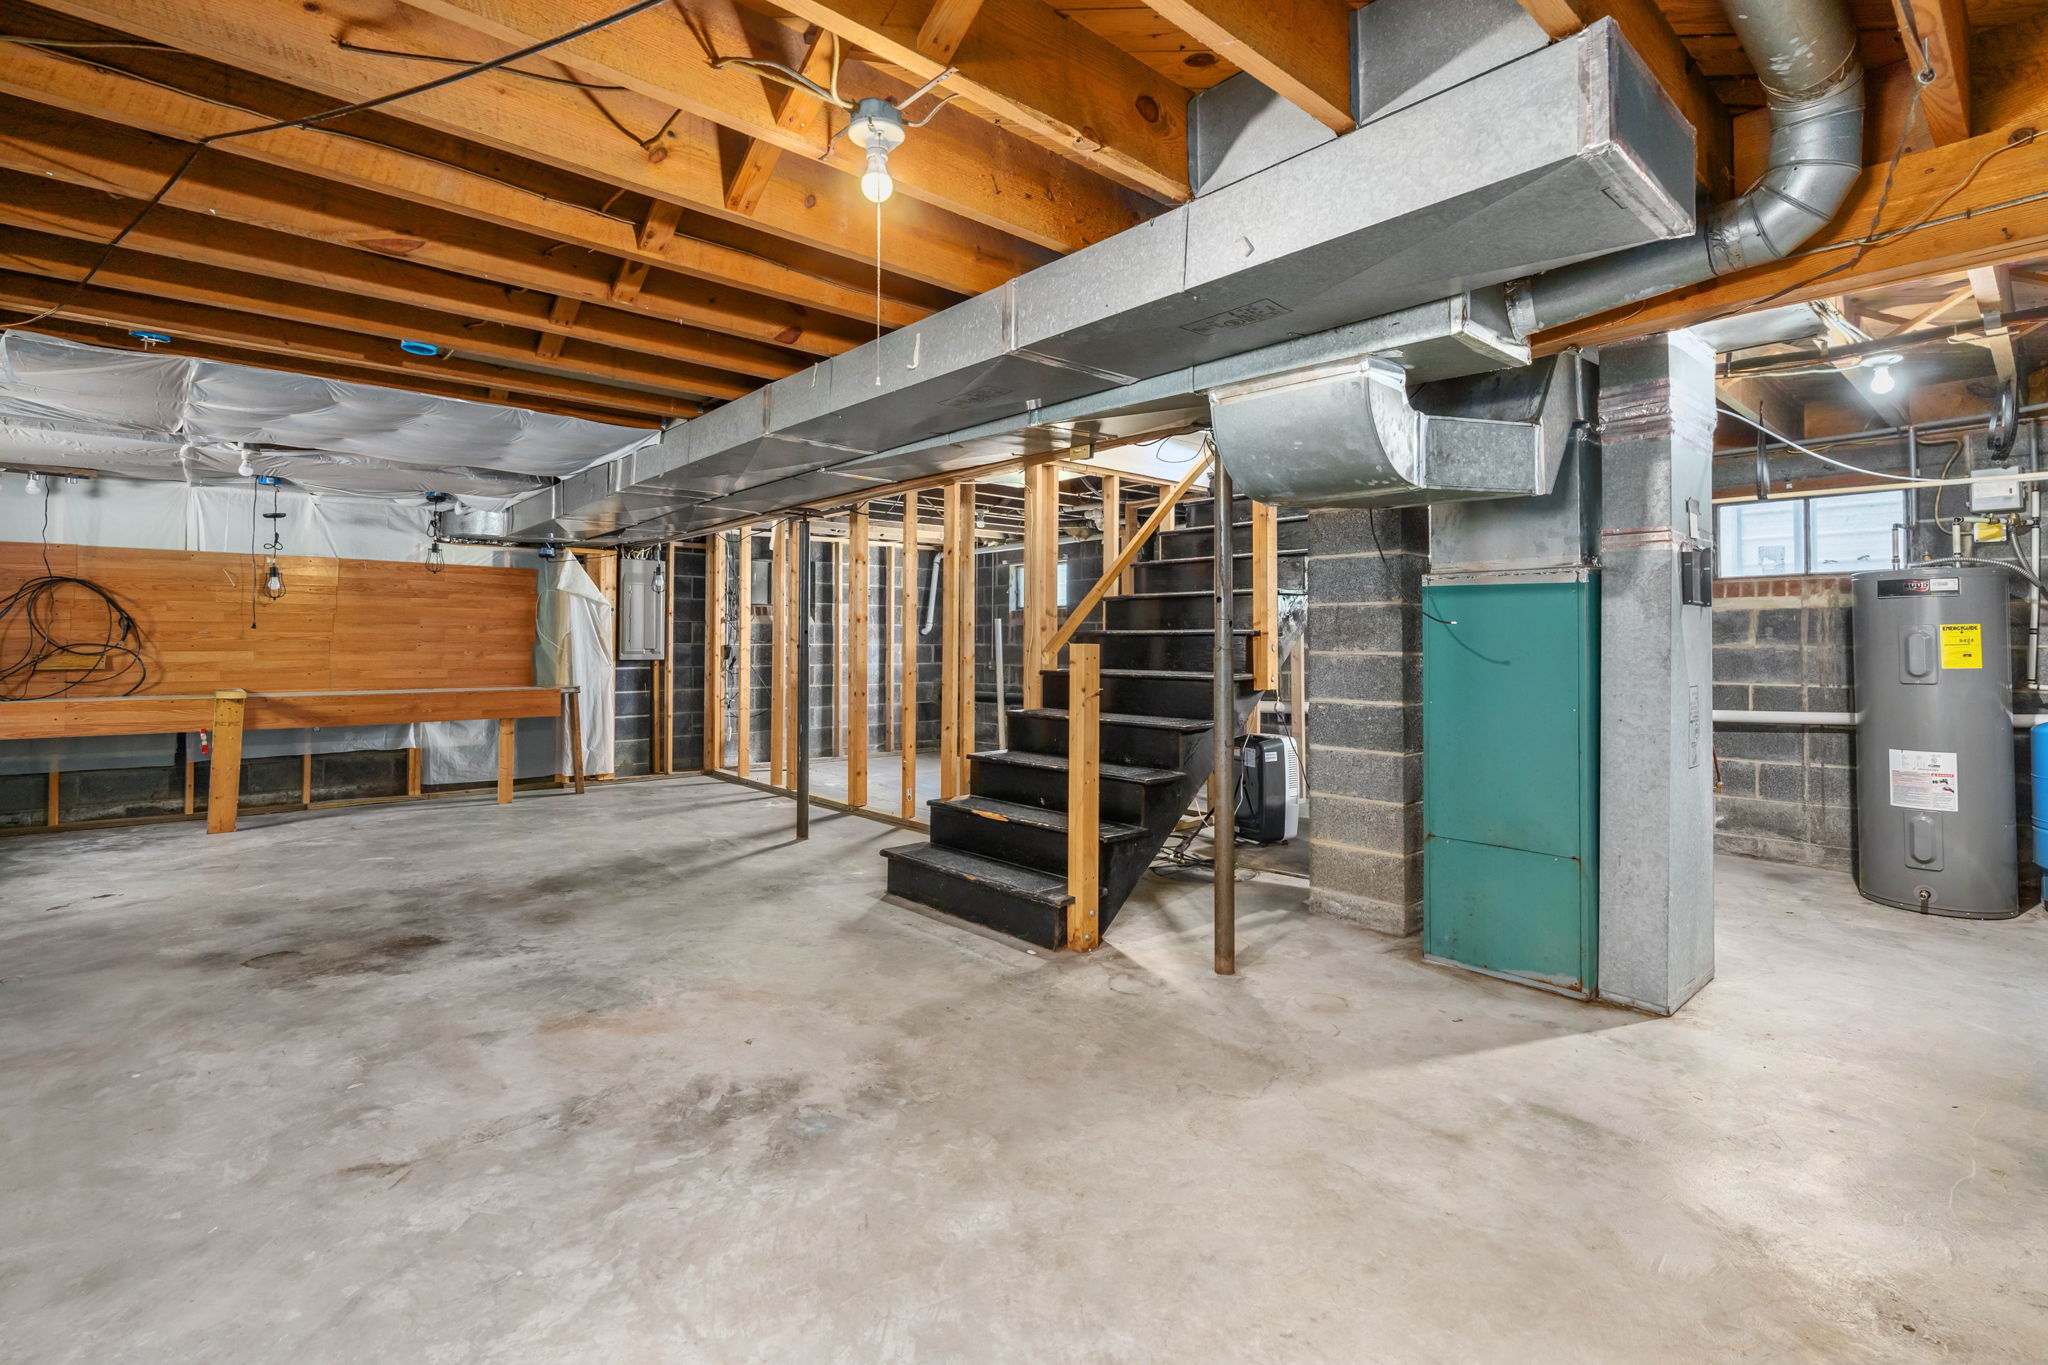 Basement offers tons of potential and storage!